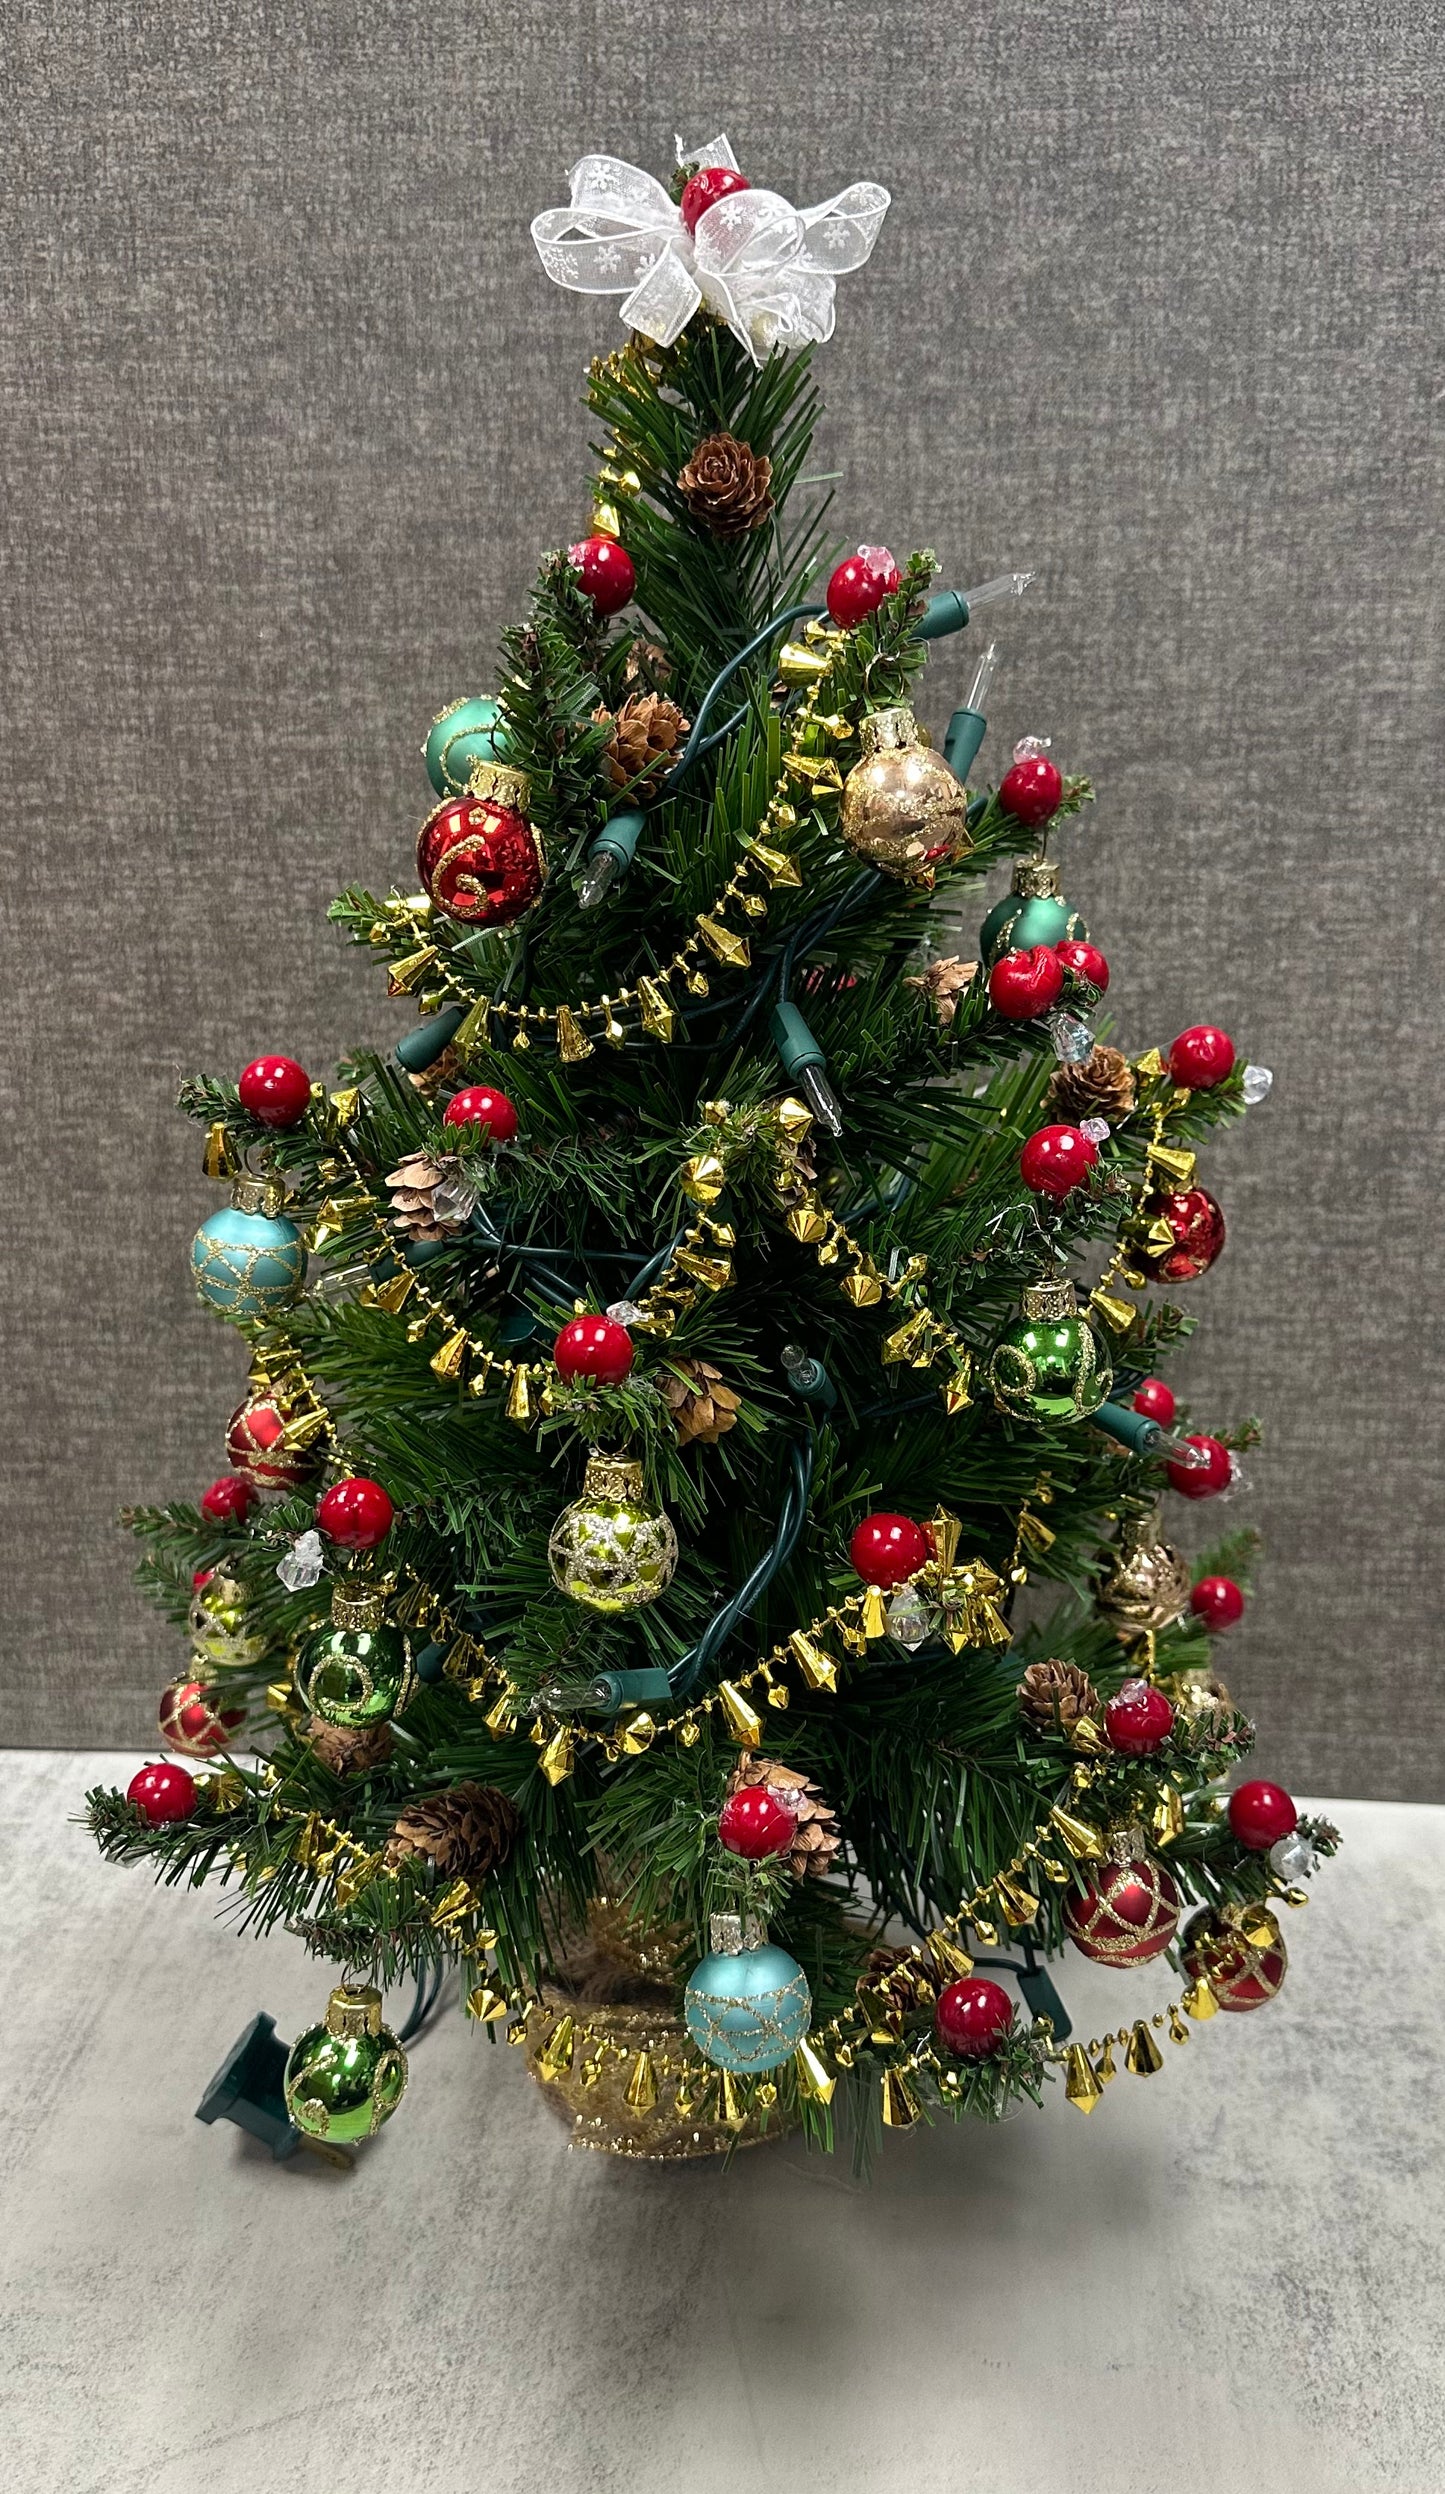 18” mini lighted Christmas Tree with gold accents, cranberries, pinecones, and ornaments-made by hand